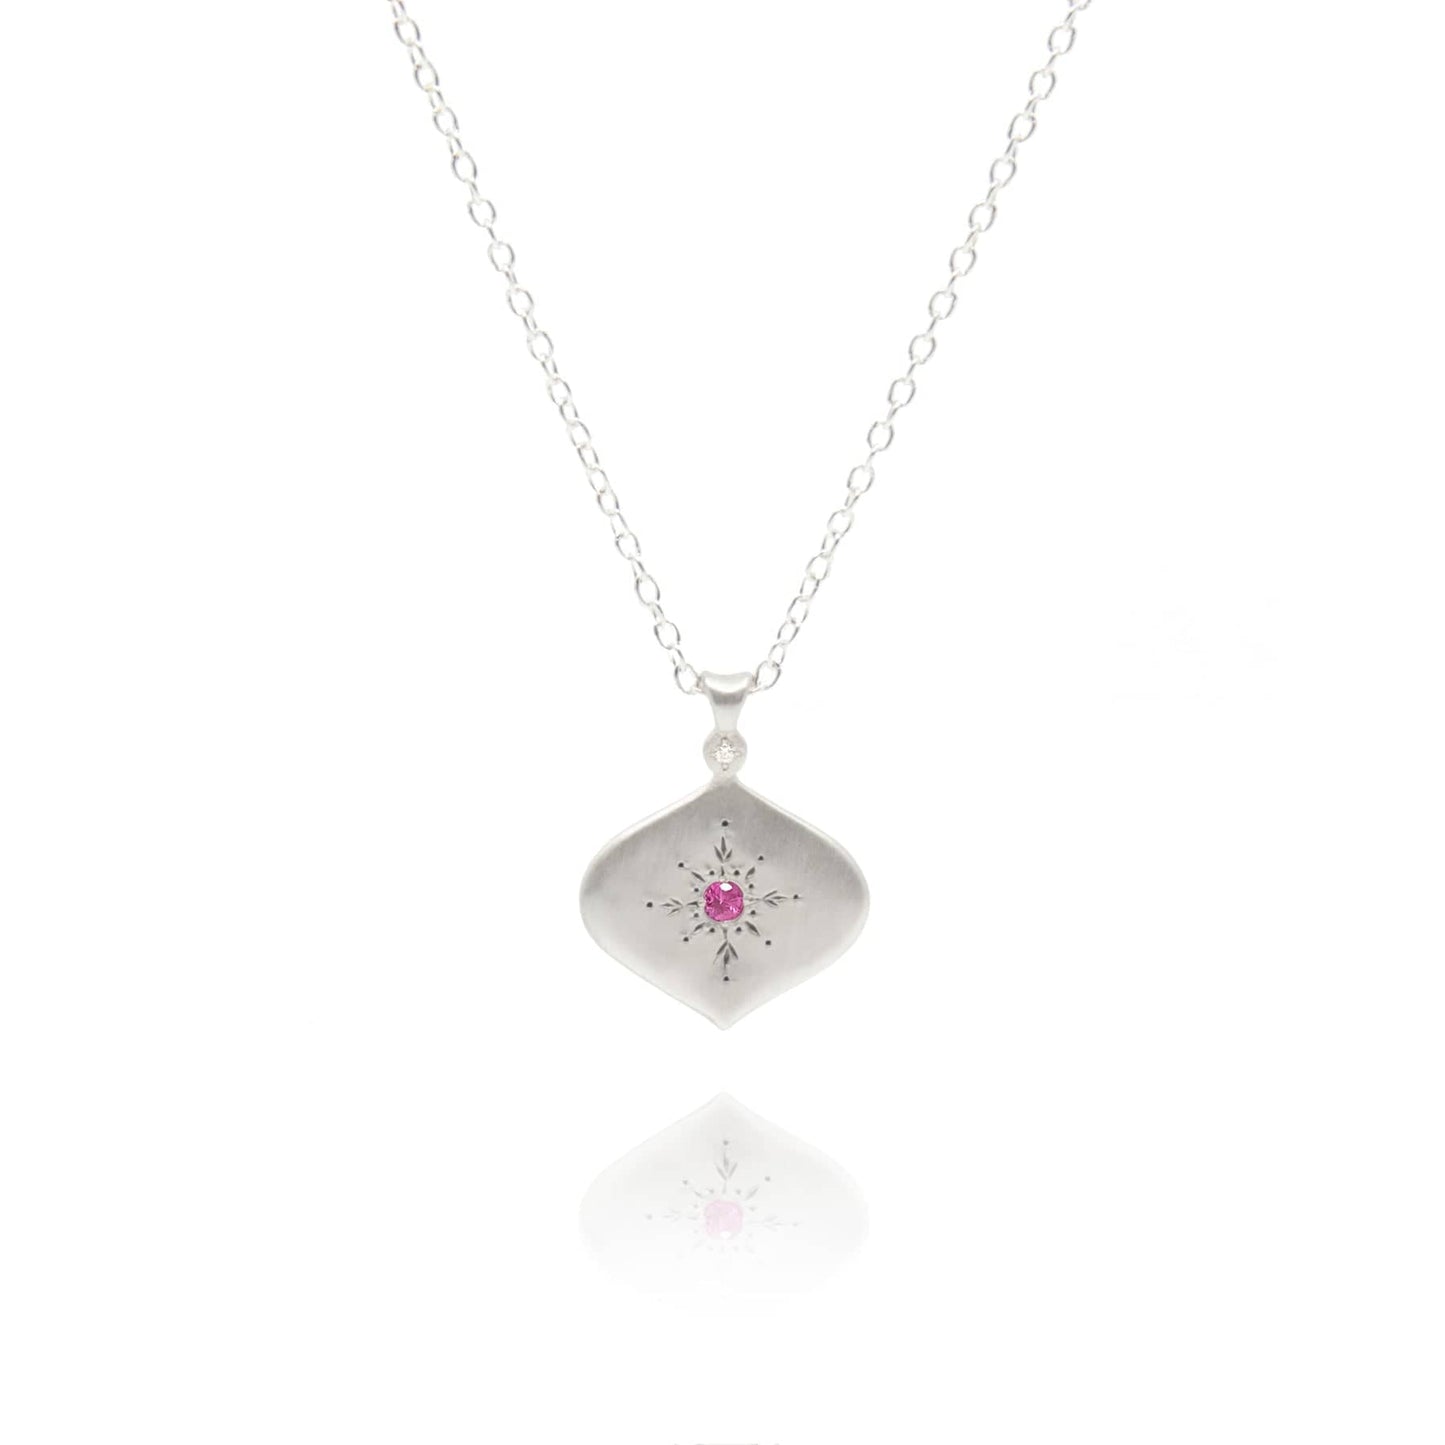 NKL North Star Pendant in Pink Sapphire